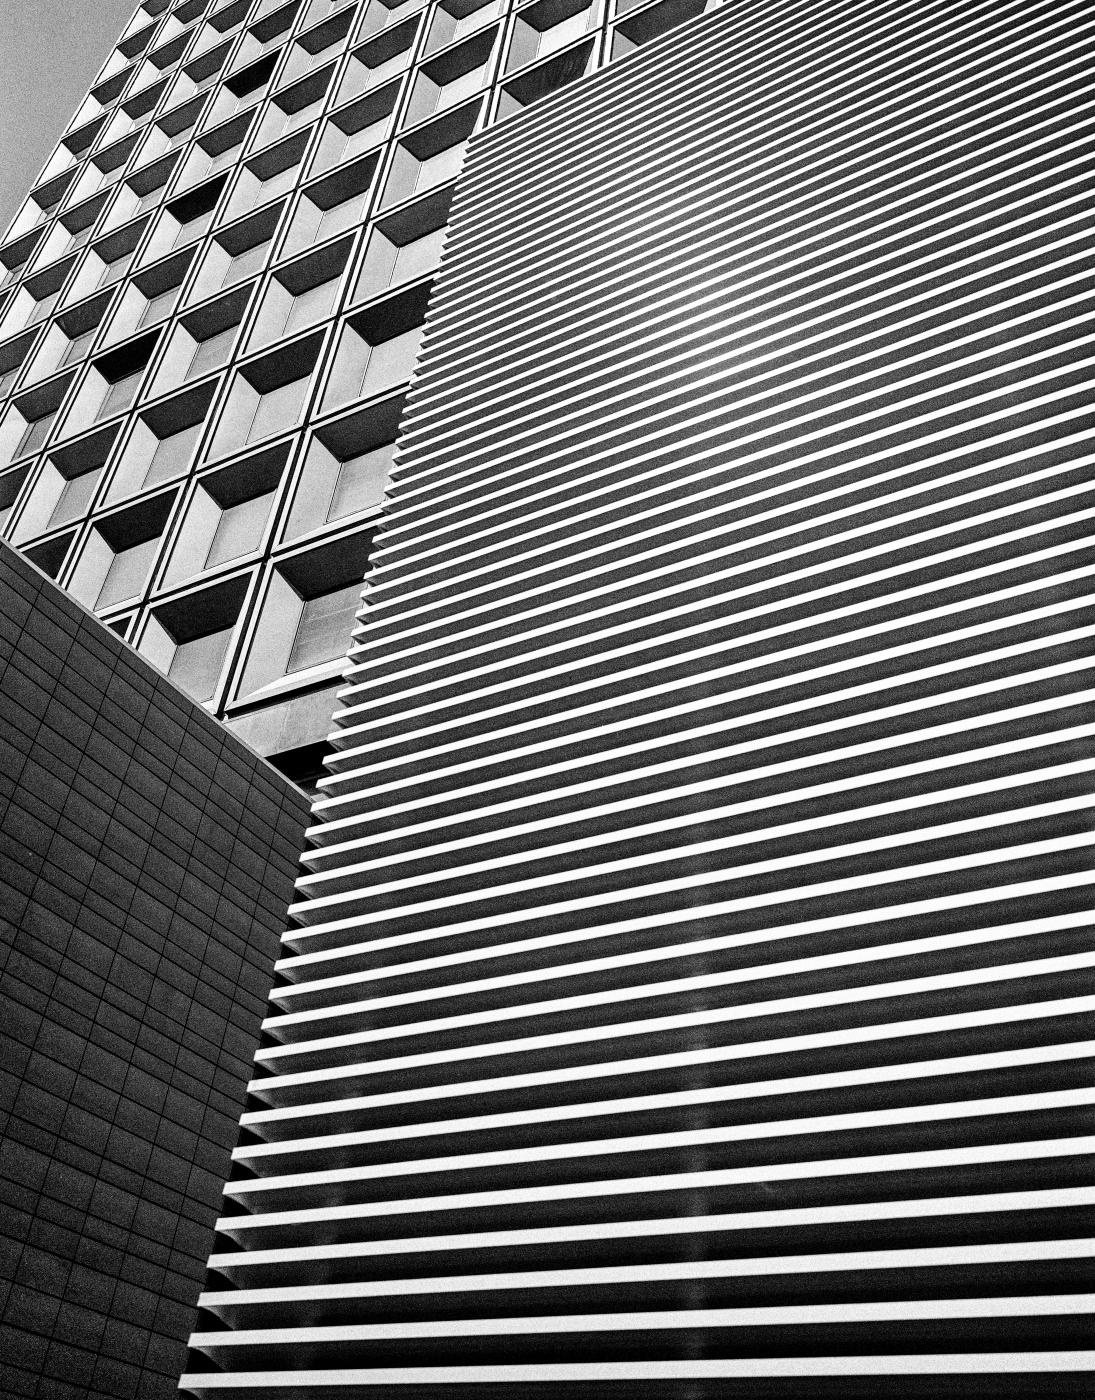 Architectural Abstract 120826110 | Buy this image